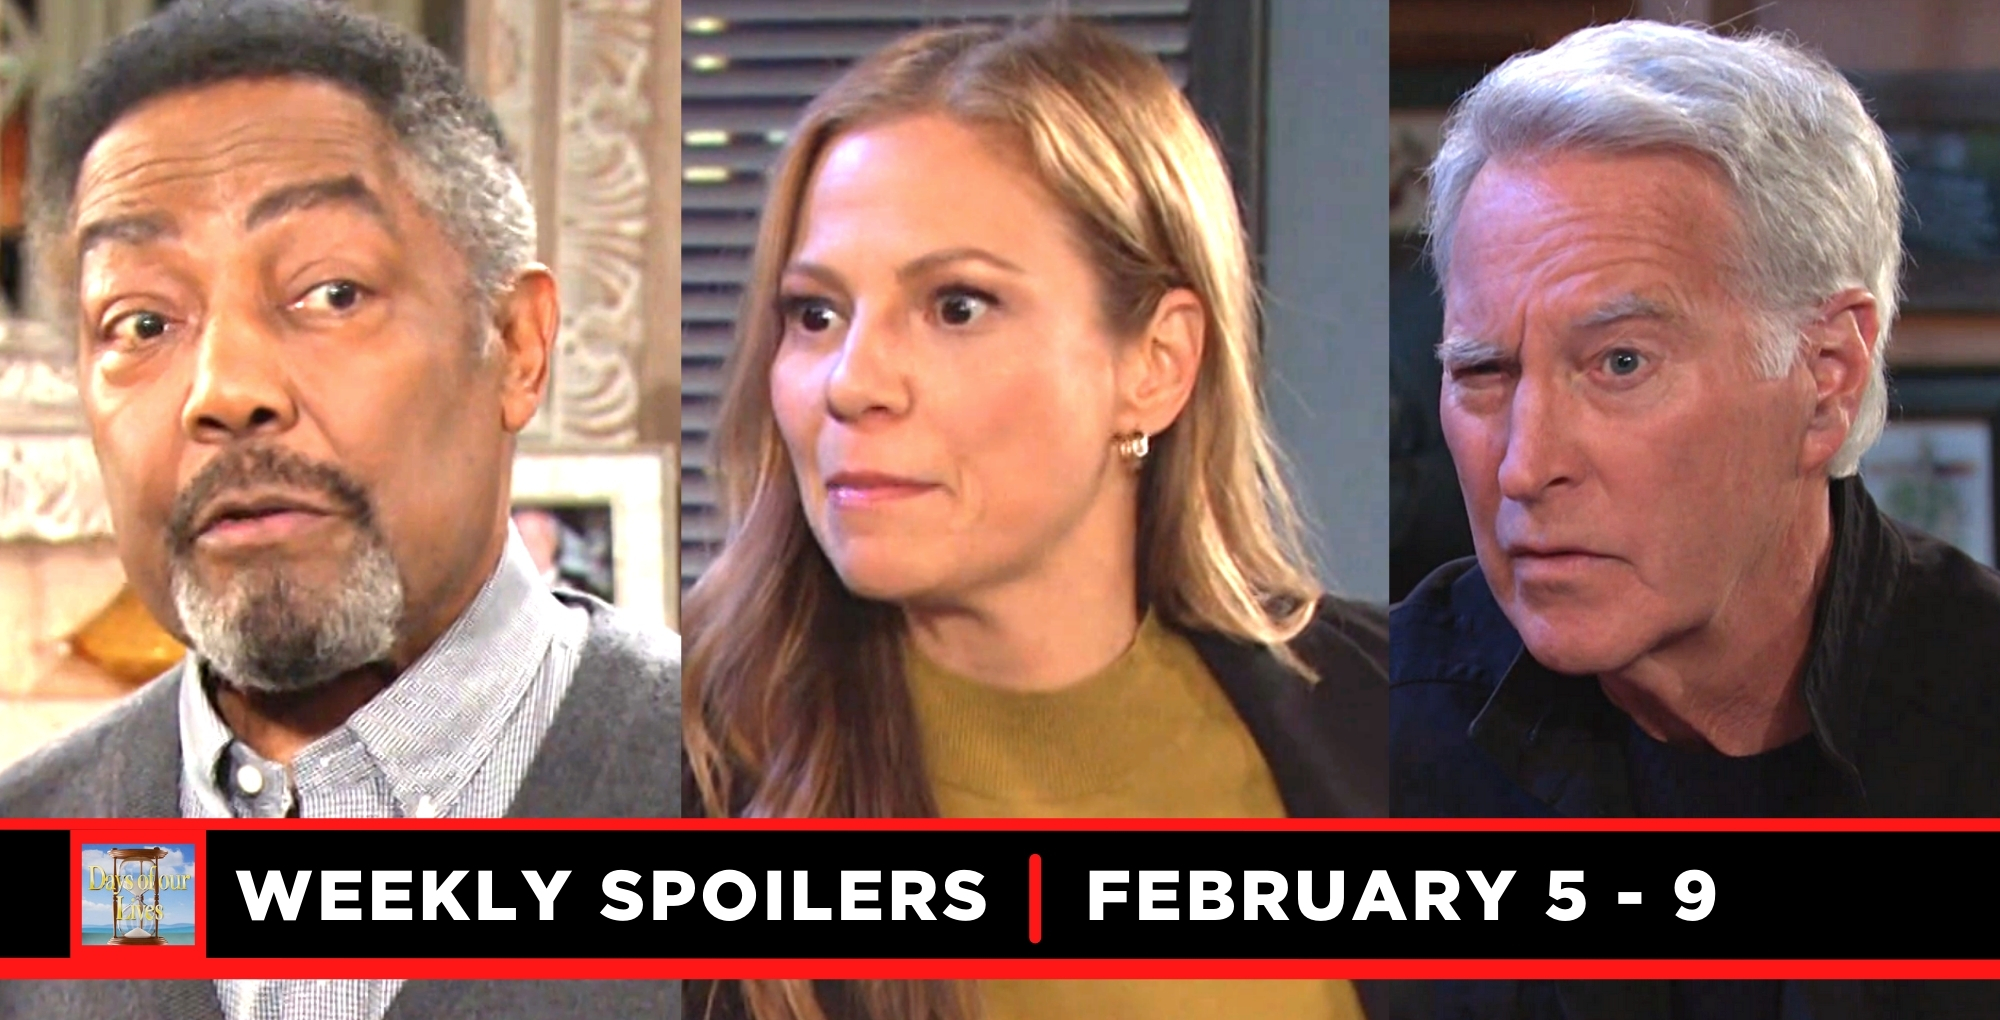 days of our lives spoilers for the week of february 5-9, abe, ava, john